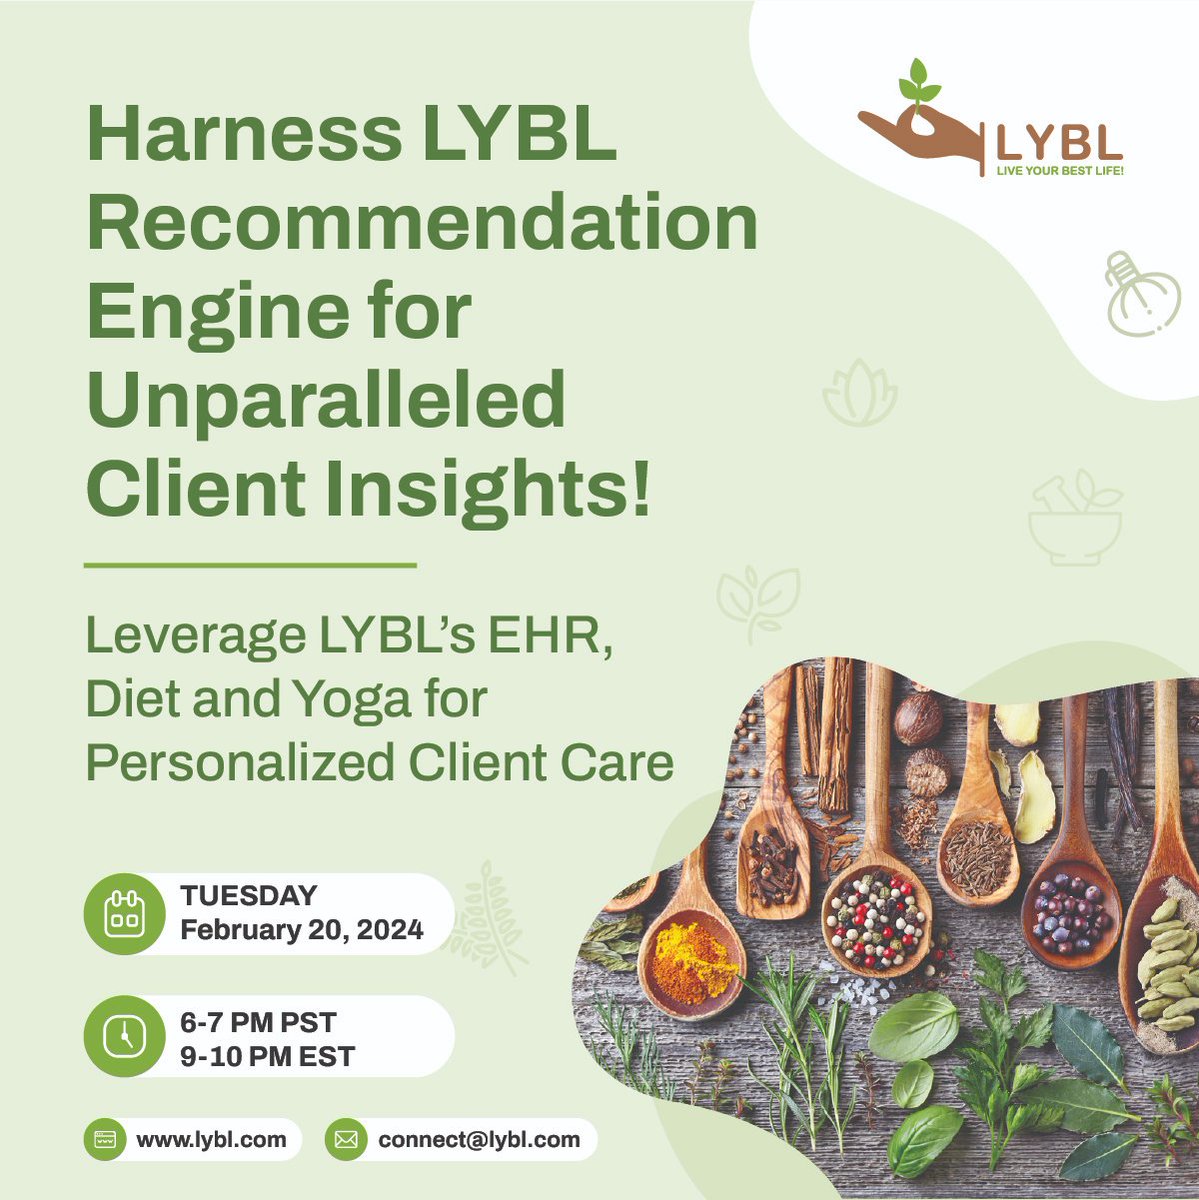 At LYBL, we're excited to offer Ayurvedic practitioners based in the USA, an innovative recommendation engine that goes beyond the ordinary! Join us in rethinking Ayurveda with technology-driven personalized client care! #EHR #PersonalizedCare #Health #ClientCare #Technology